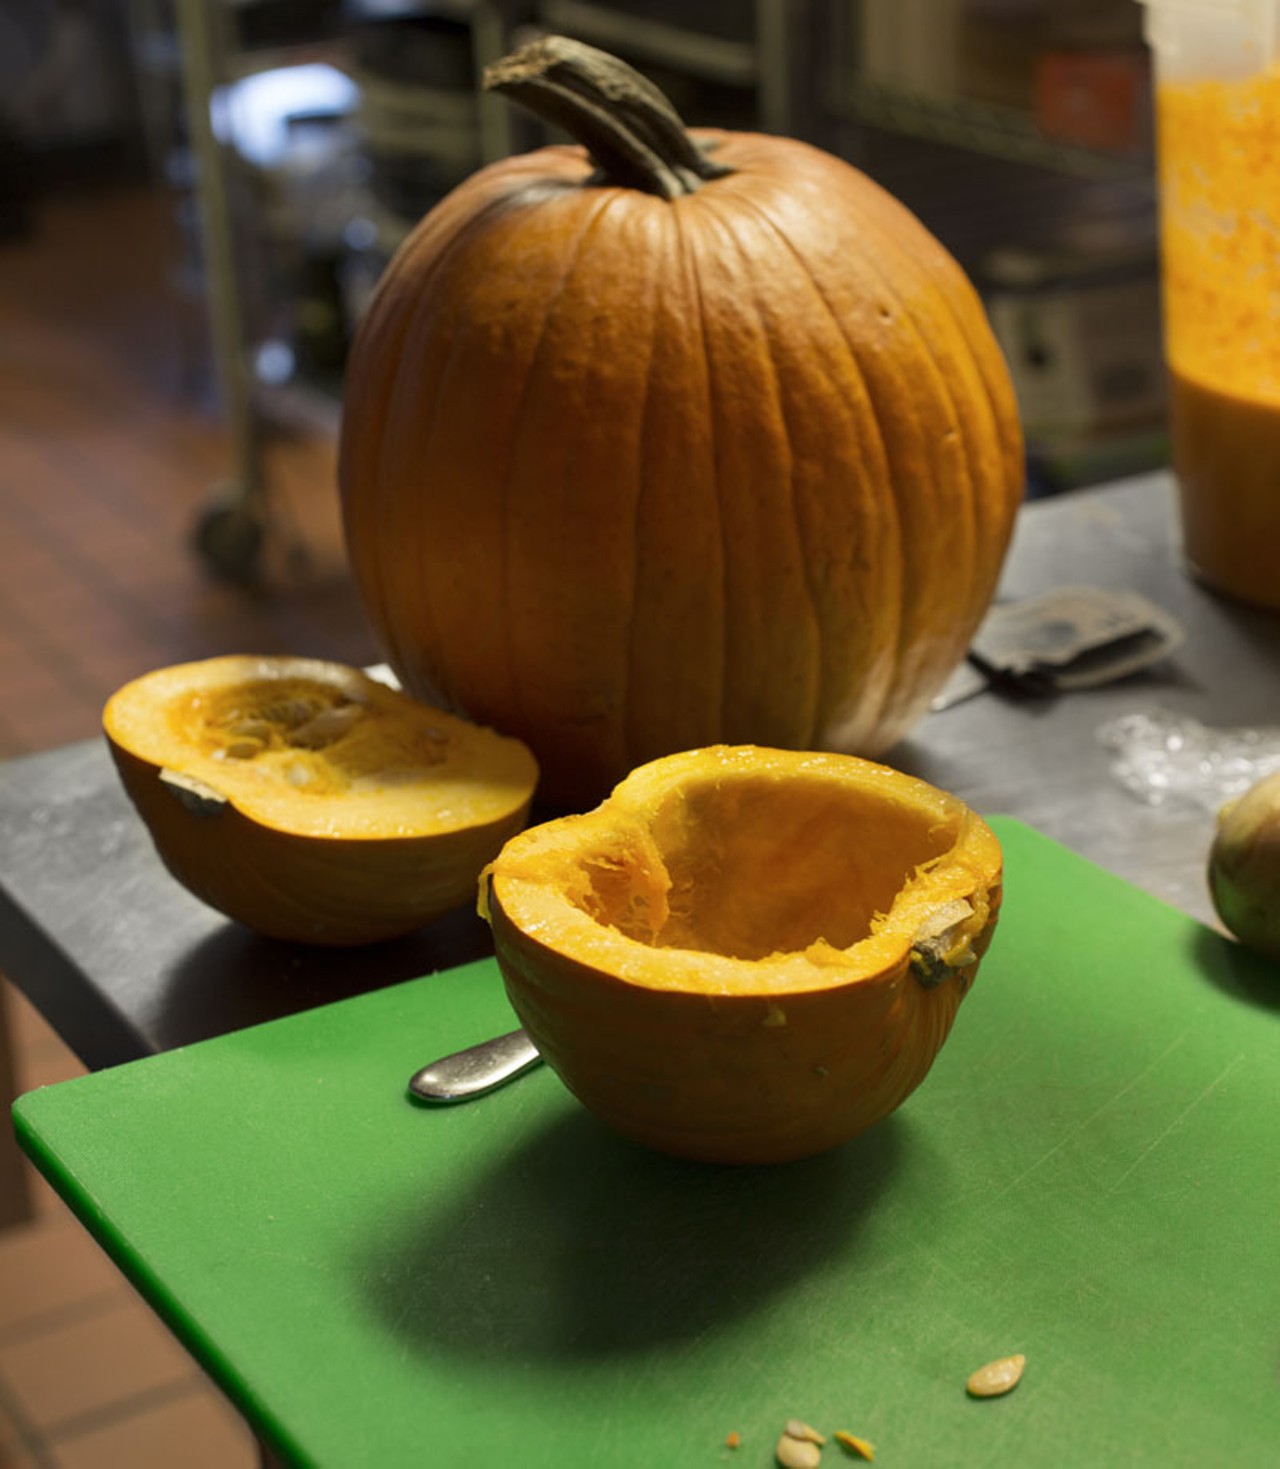 Prepping pumpkins for the pumpkin pies and cookies.